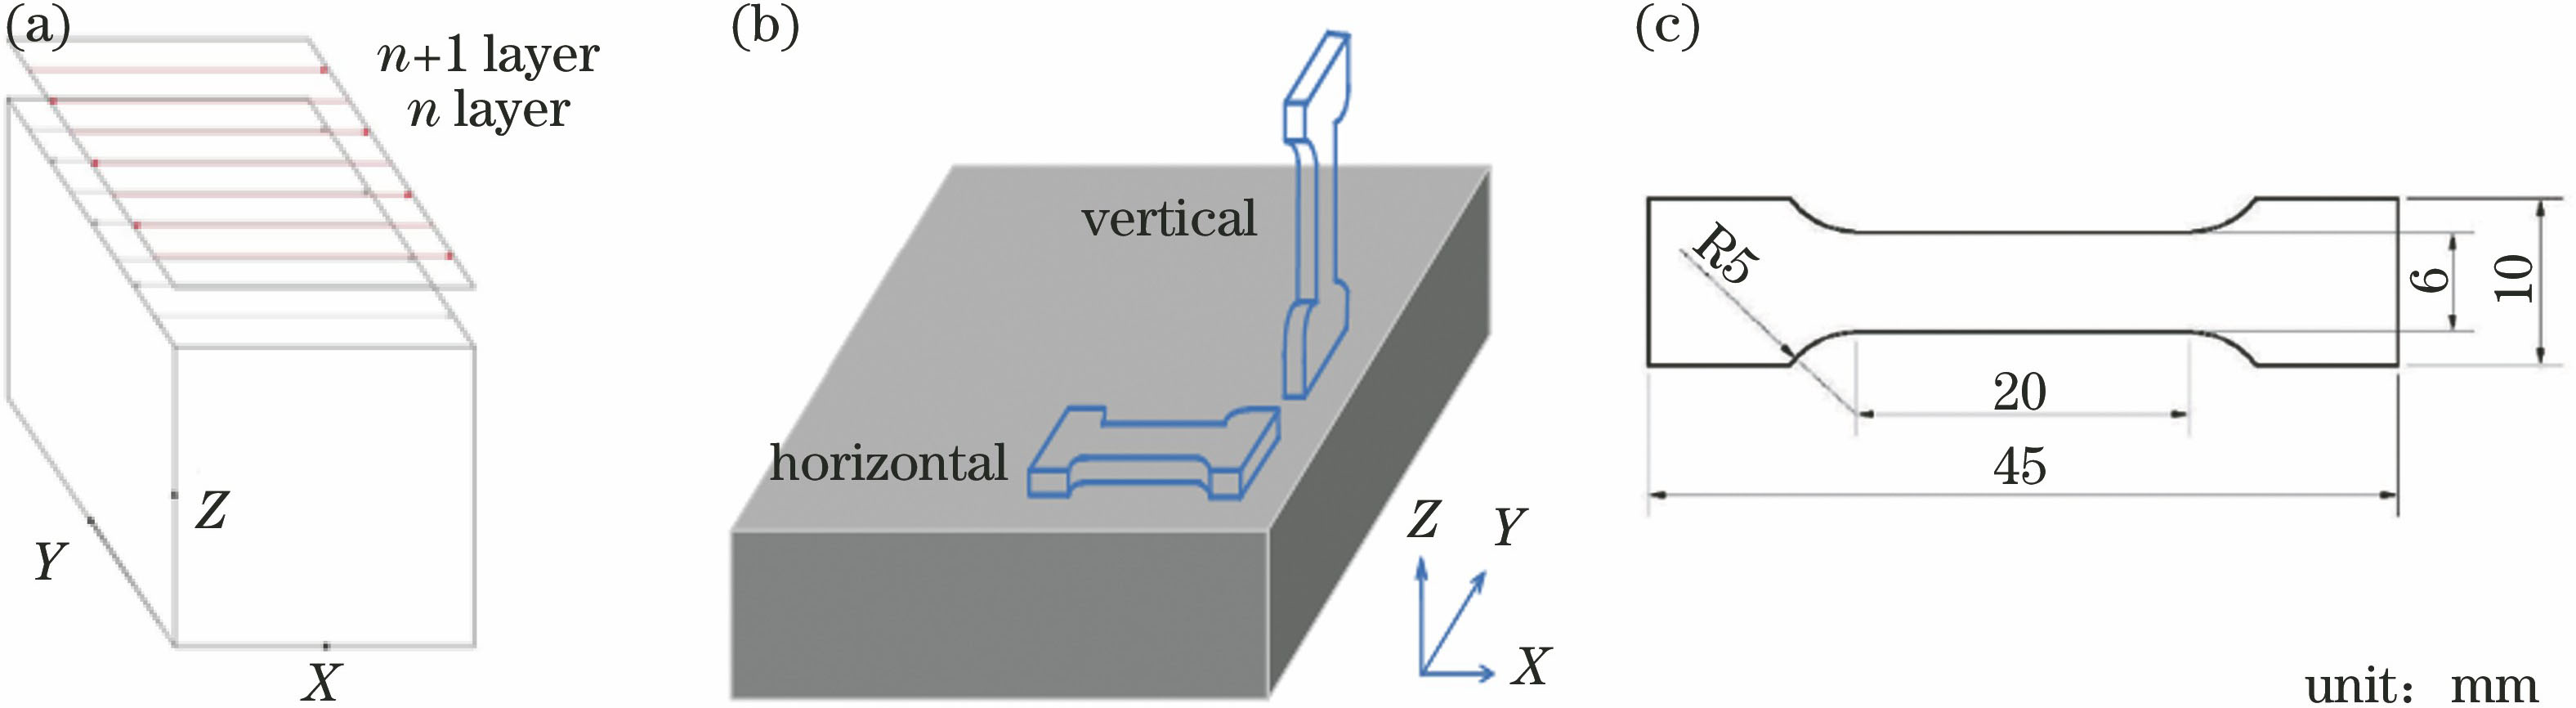 Schematic of print parameters and tensile sample. (a) Schematic of laser scanning direction; (b) schematic of building orientations; (c) schematic of three-dimensional size